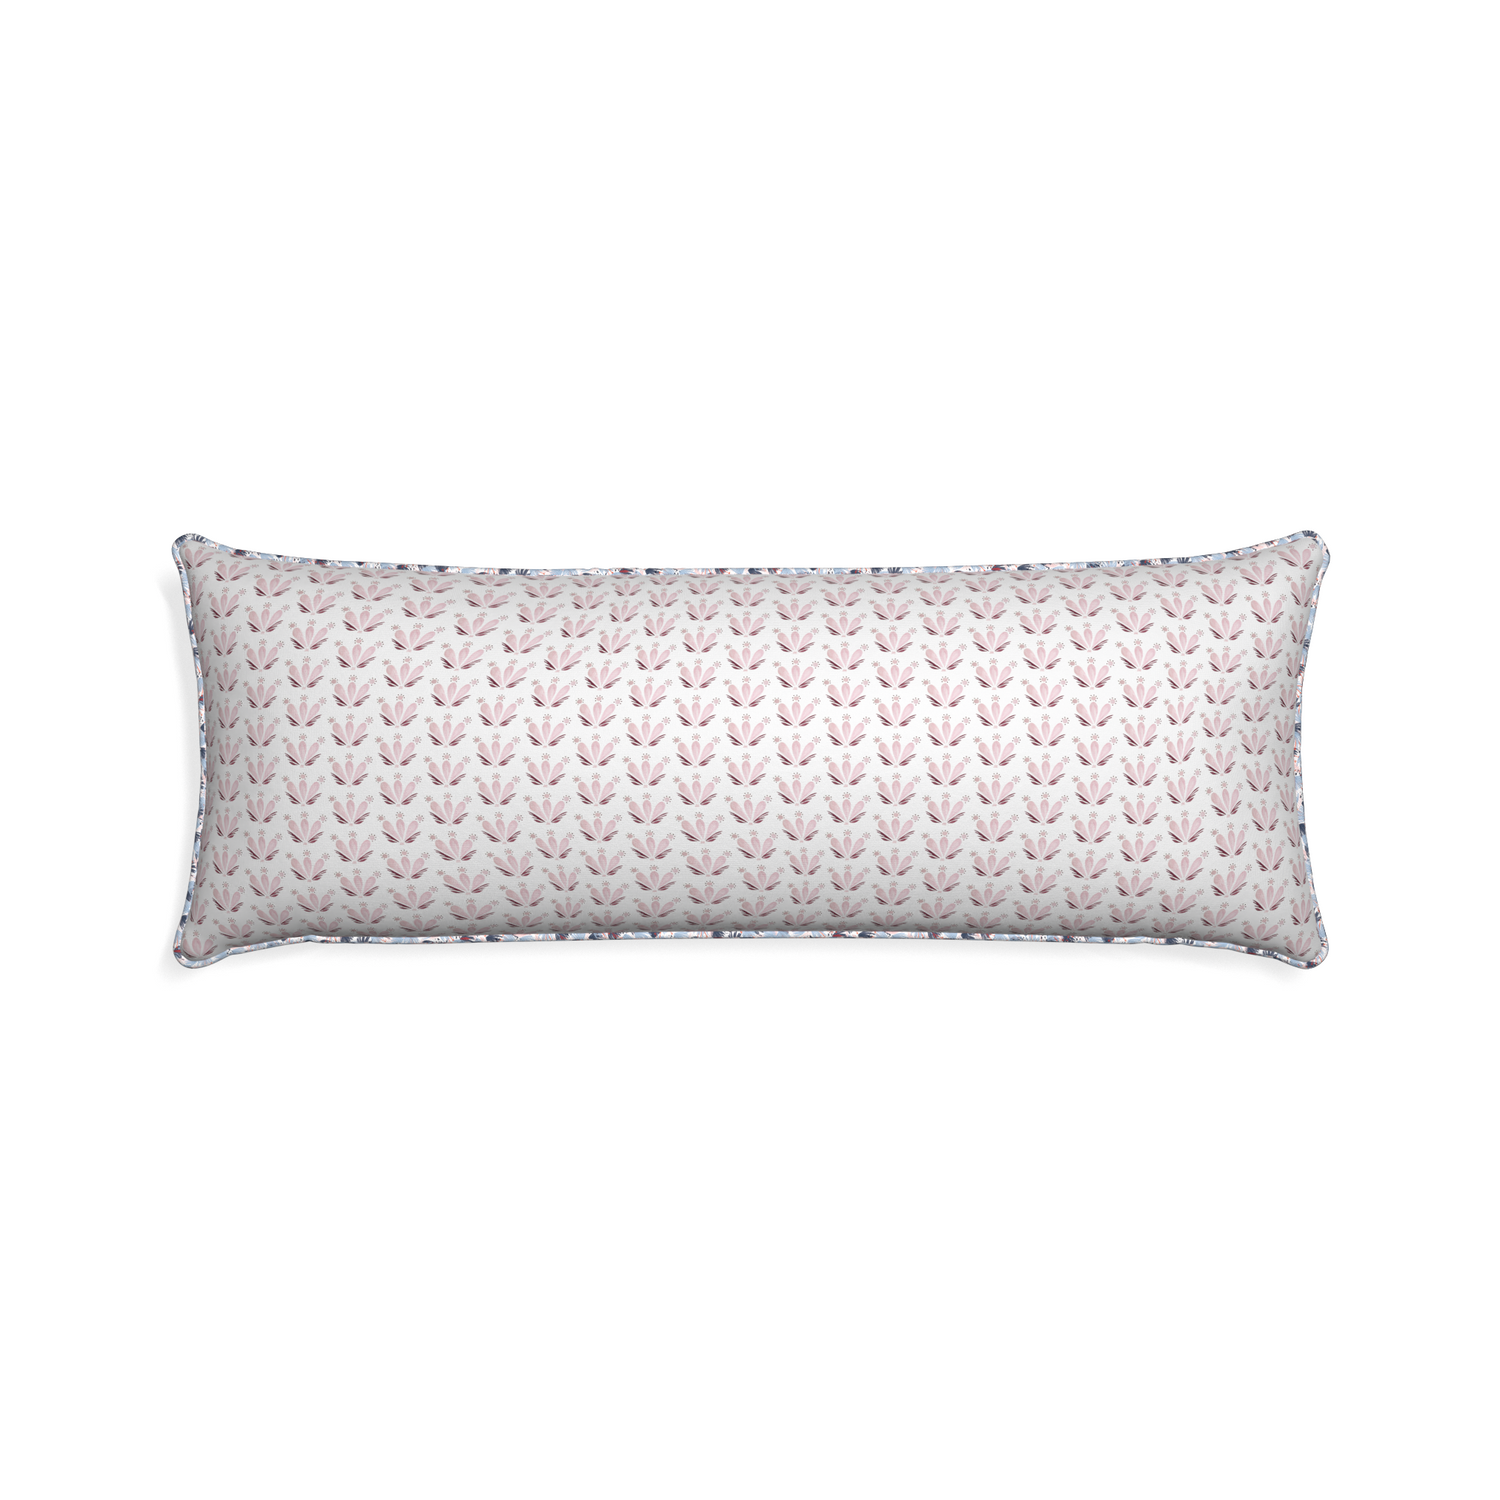 Xl-lumbar serena pink custom pillow with e piping on white background